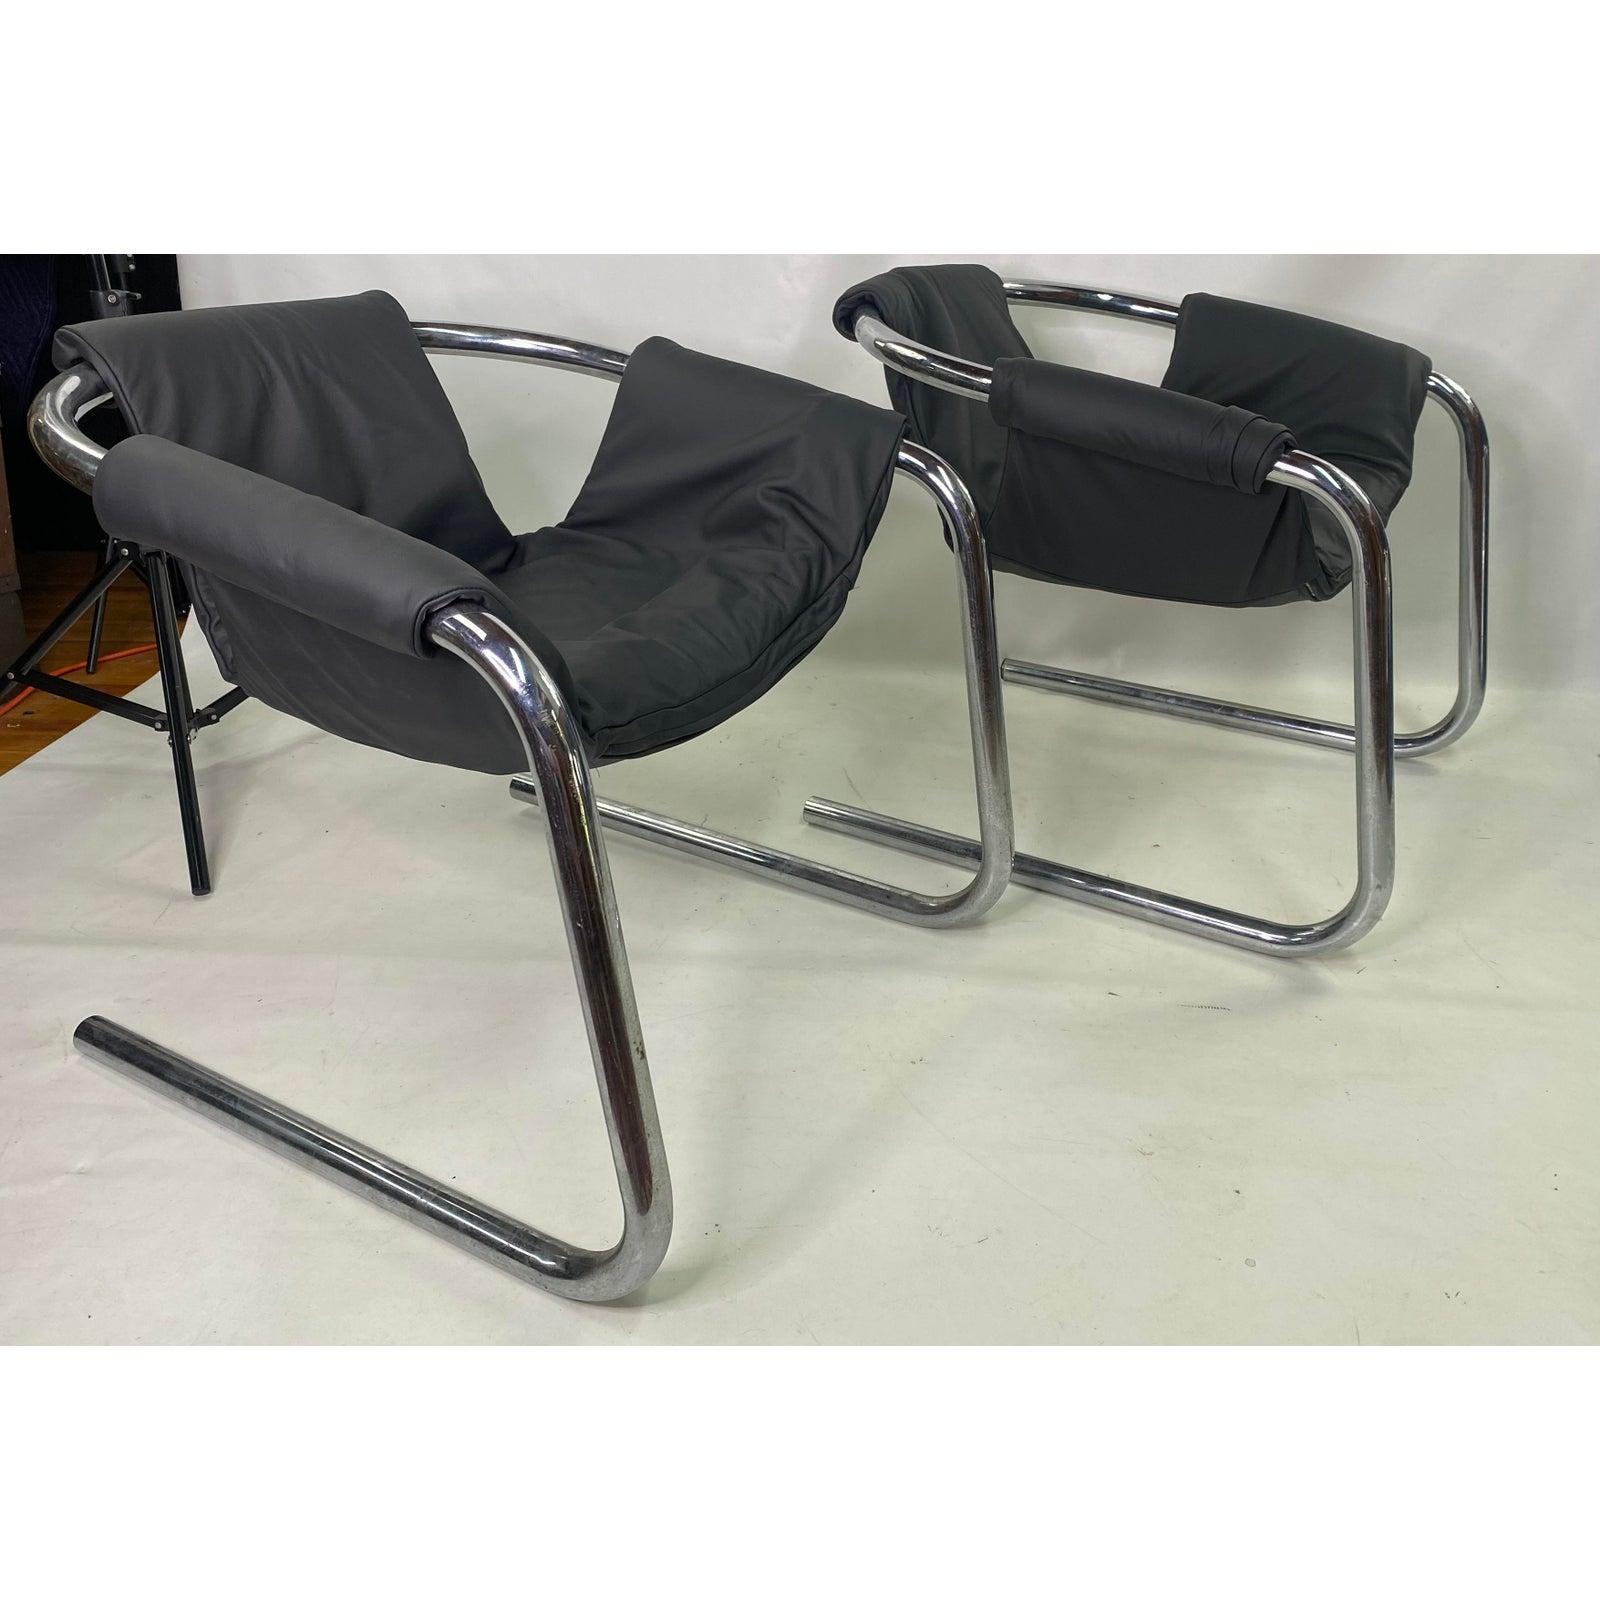 Vintage modern tubular chrome base zermatt chairs in leather a pair. Both have been reupholstered recently in leather.